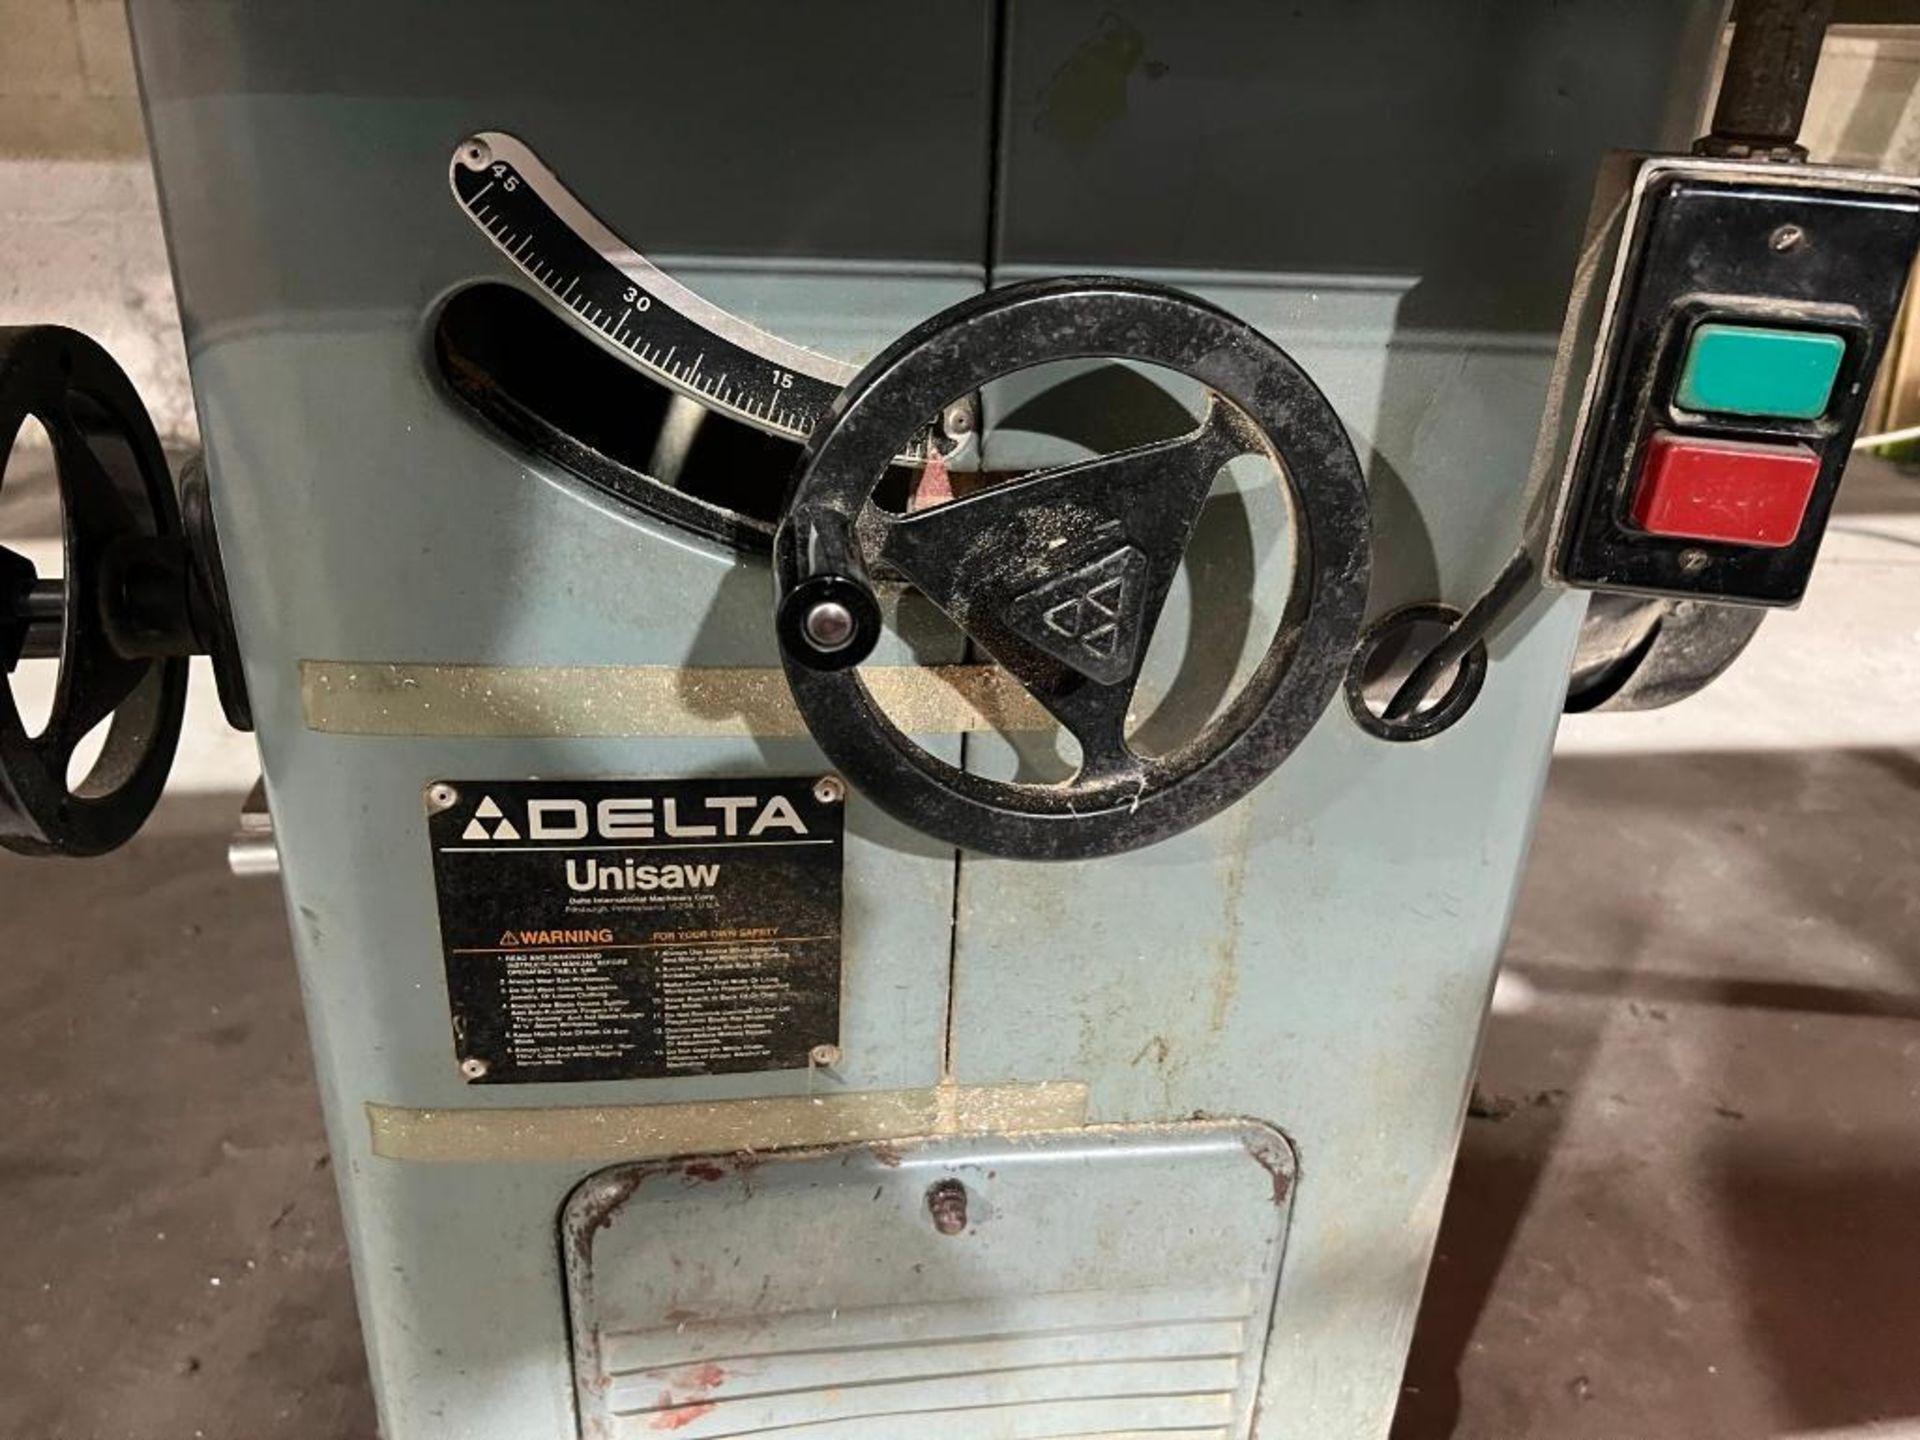 Delta Unisaw Table Saw, S/N 86B00540, 3 Phase Motor - Image 3 of 19